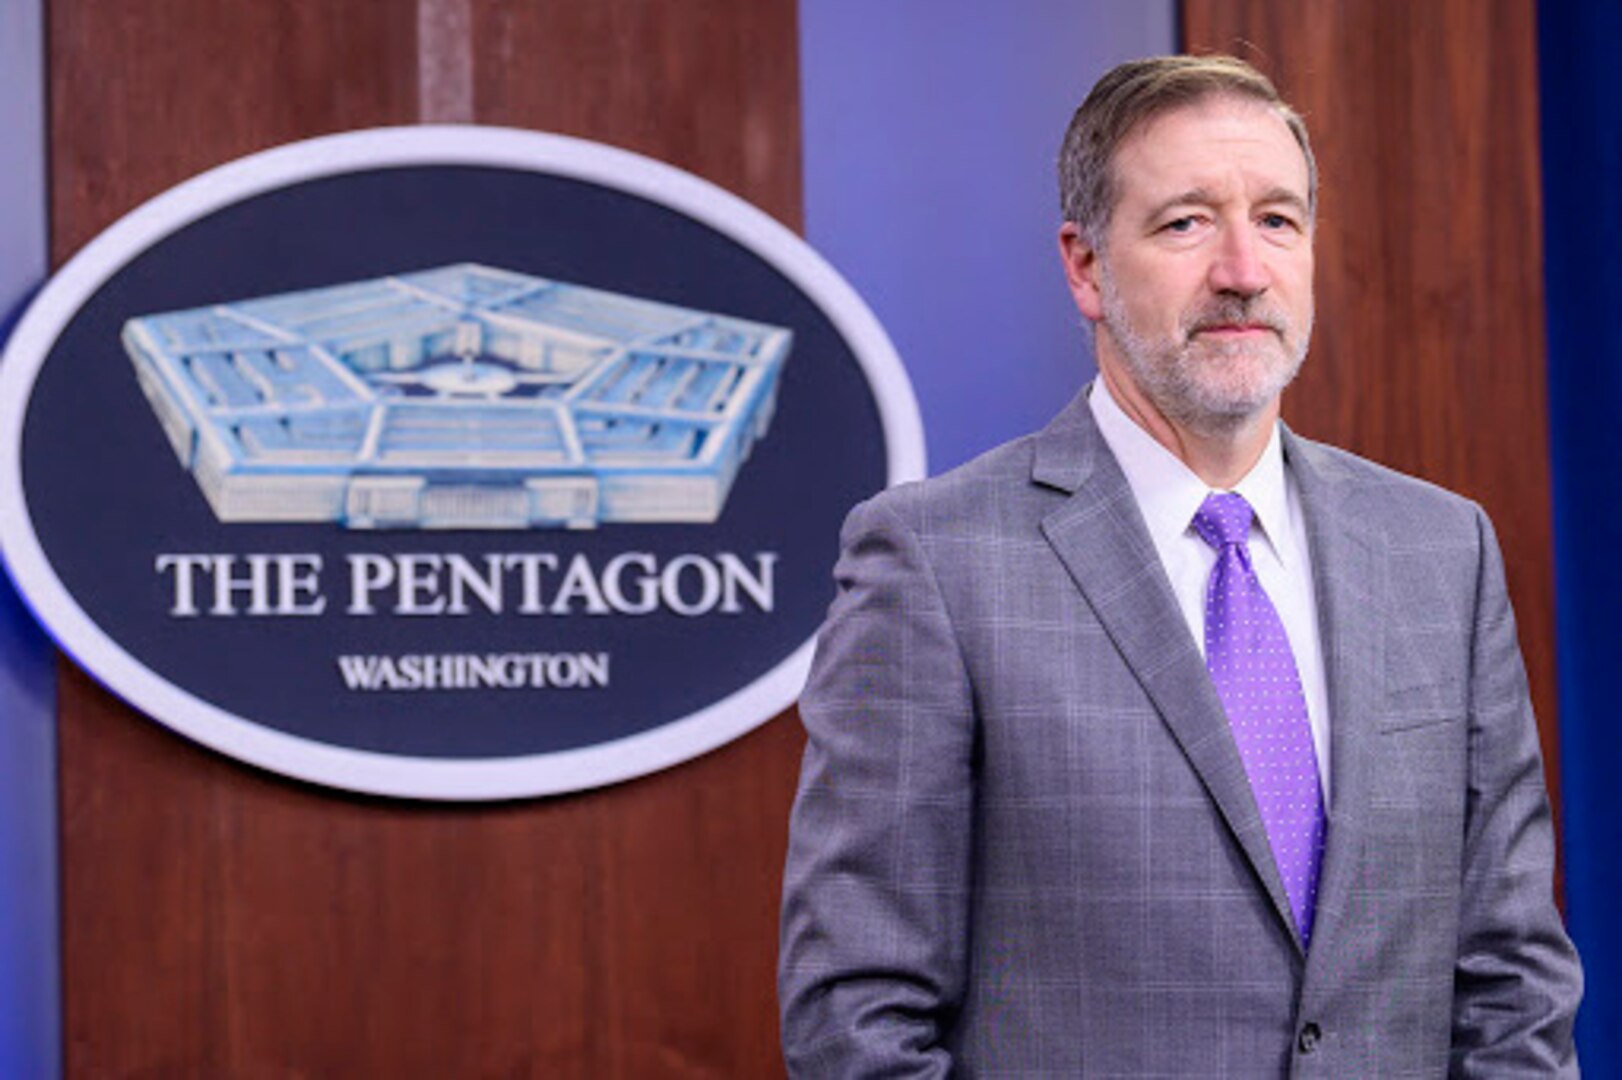 A man stands in front of a sign indicating that he is at the Pentagon.